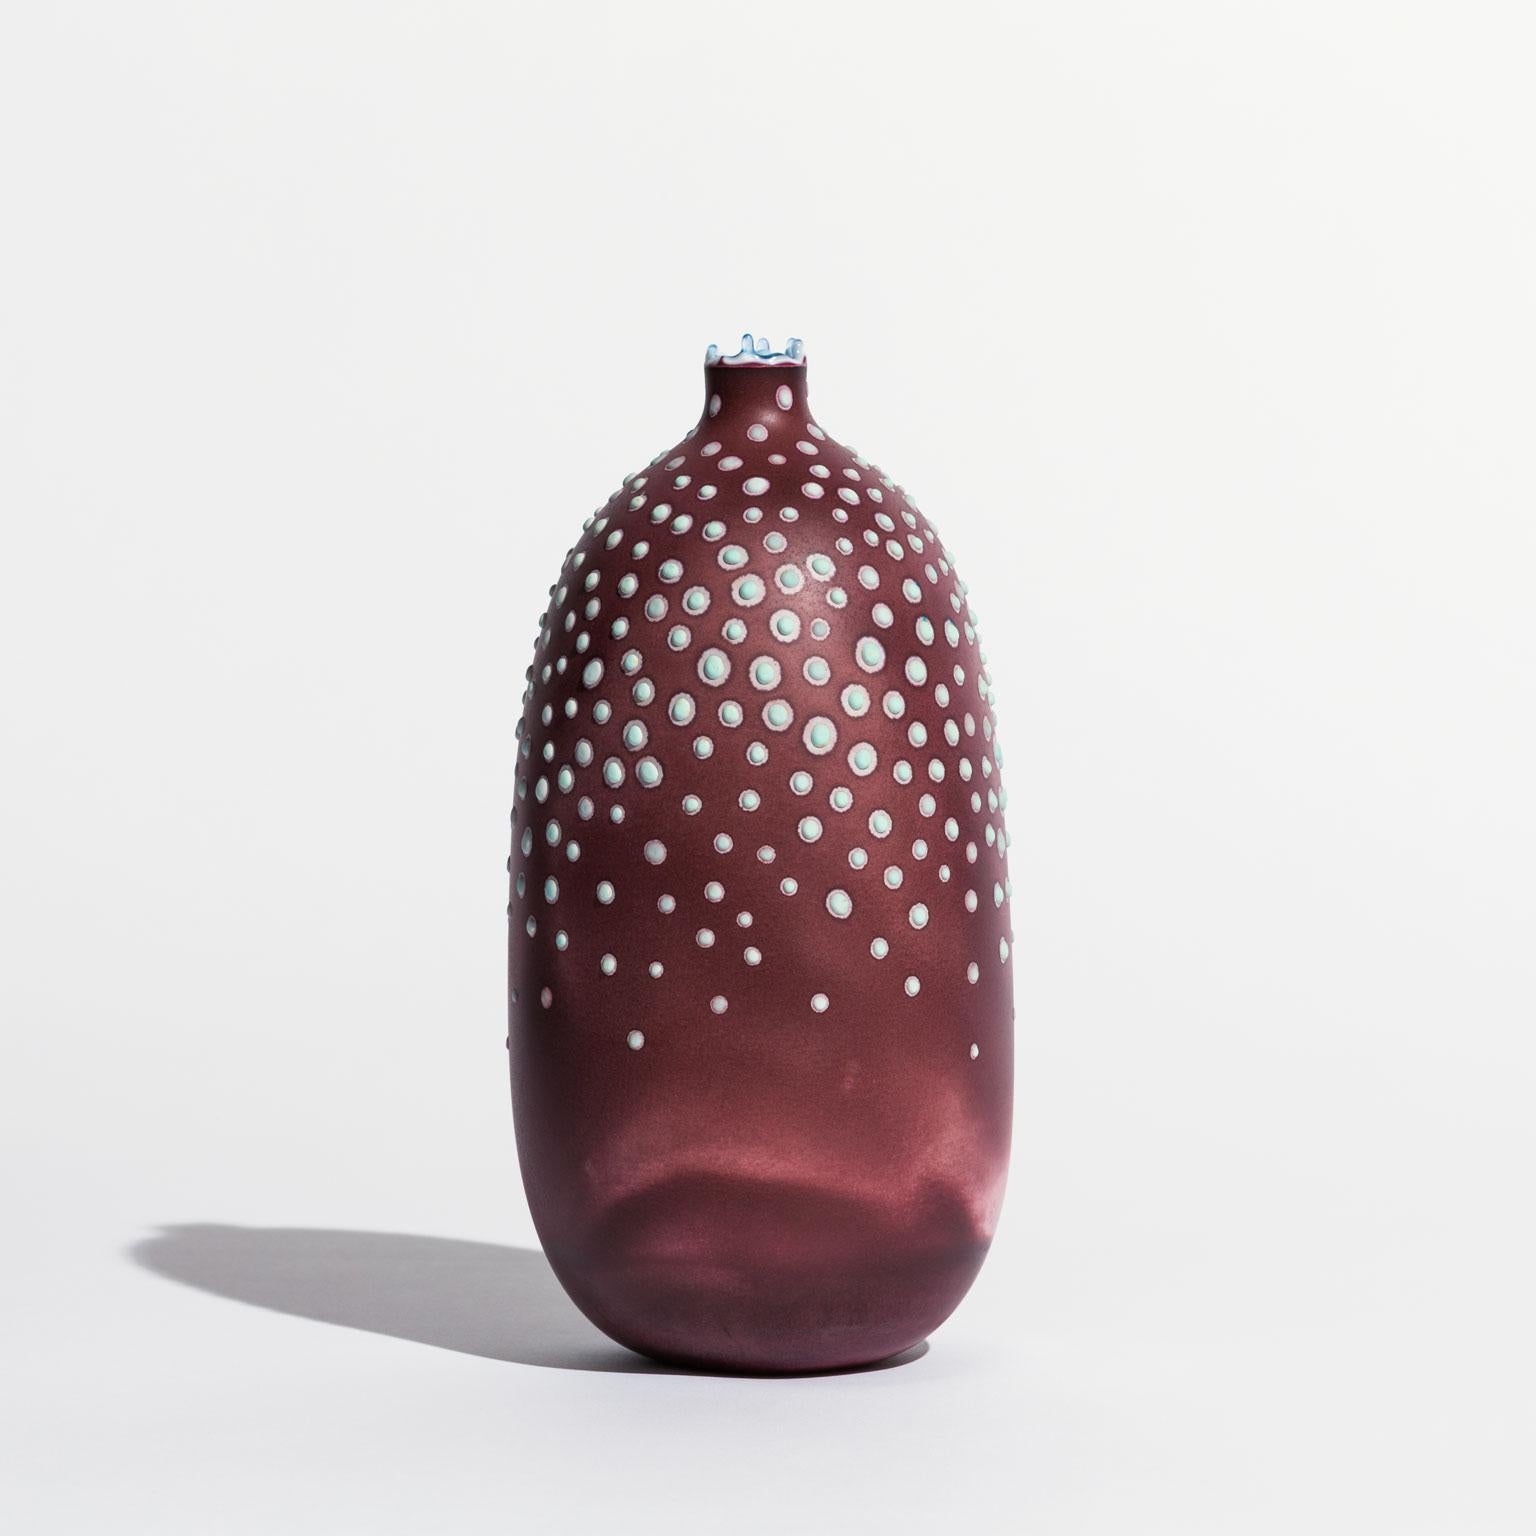 Oxblood Huxley vase by Elyse Graham
Dimensions: W 14 x D 14 x H 25.5 cm
Materials: Plaster, Resin
MOLDED, DYED, AND FINISHED BY HAND IN LA. CUSTOMIZATION
AVAILABLE.
ALL PIECES ARE MADE TO ORDER

Our Microbe Collection is inspired by the